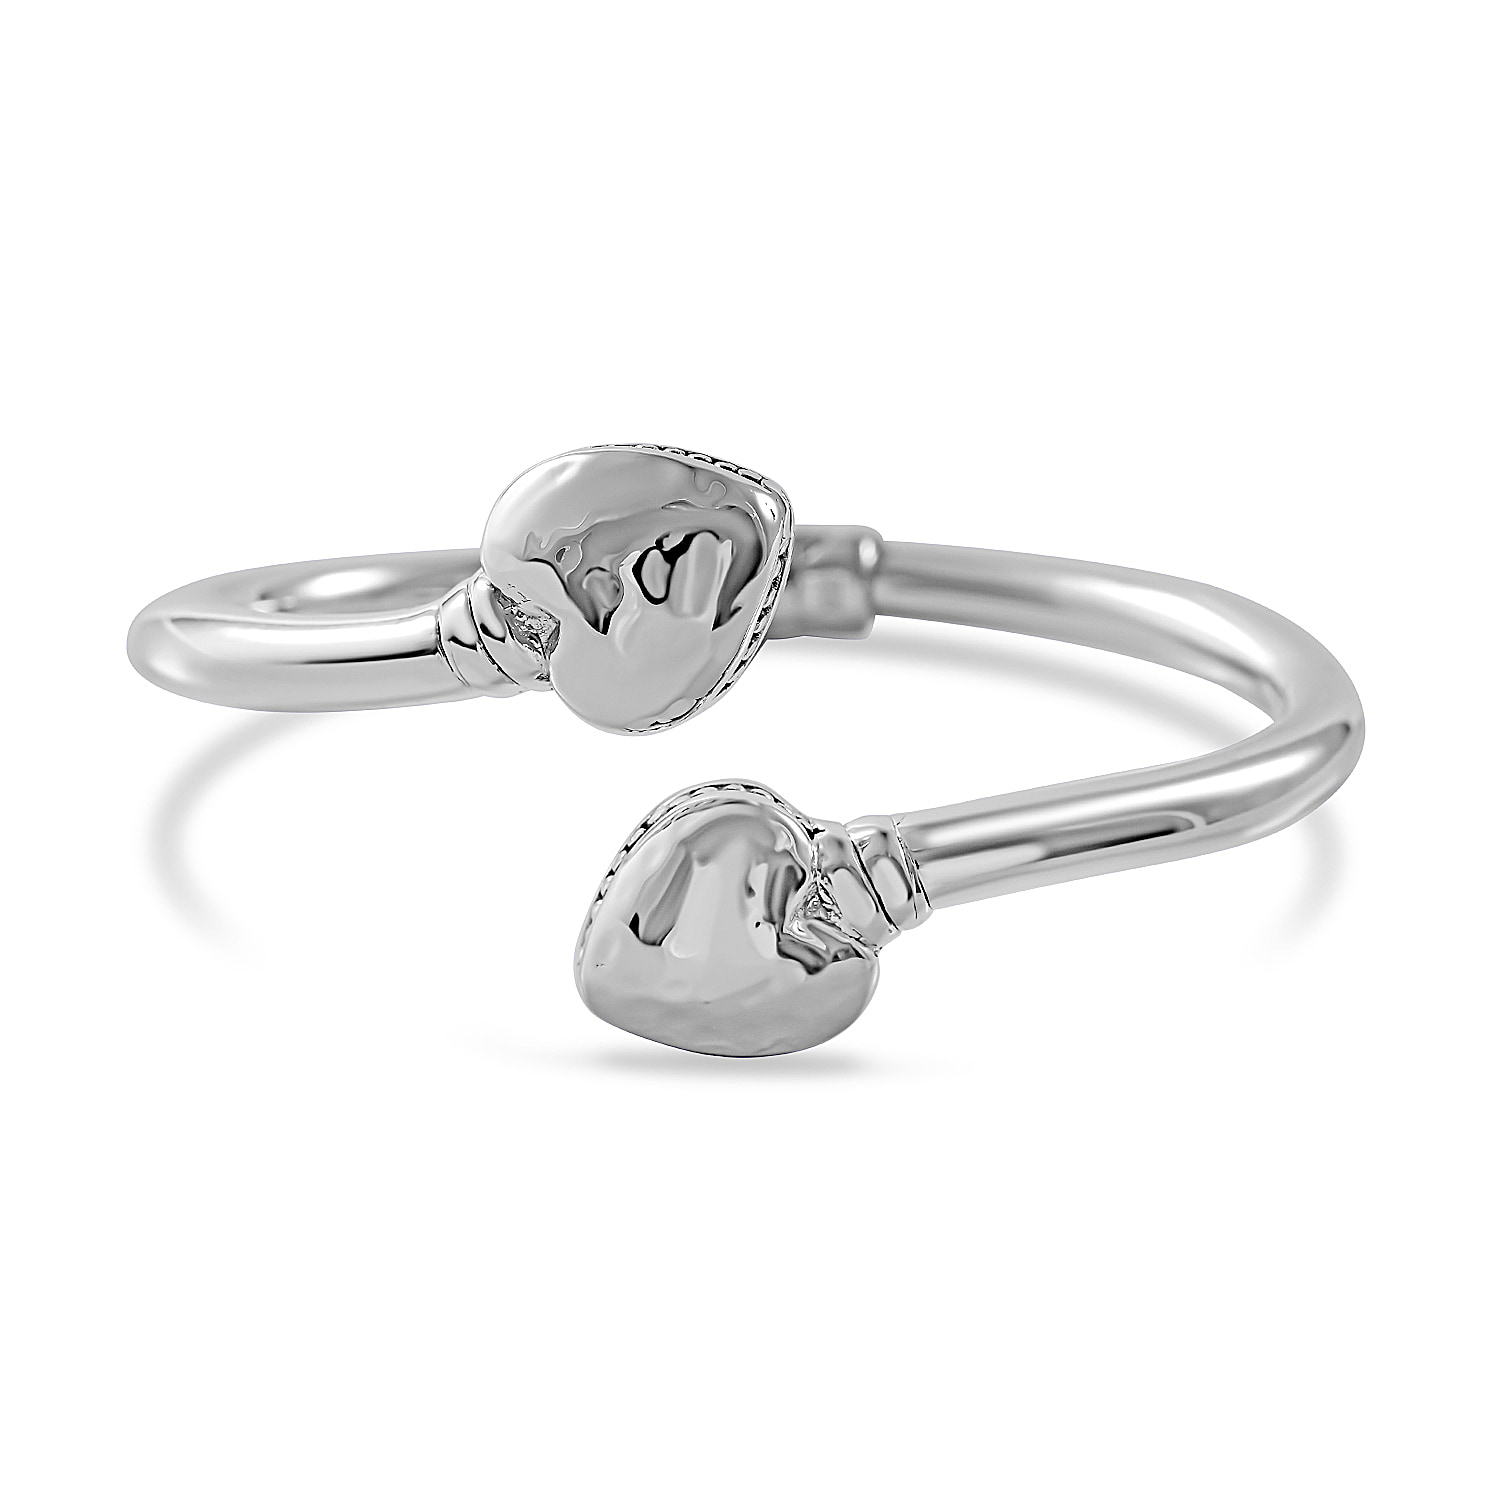 Sterling Silver Heart Bangle, Silver Wt. 14 Gms